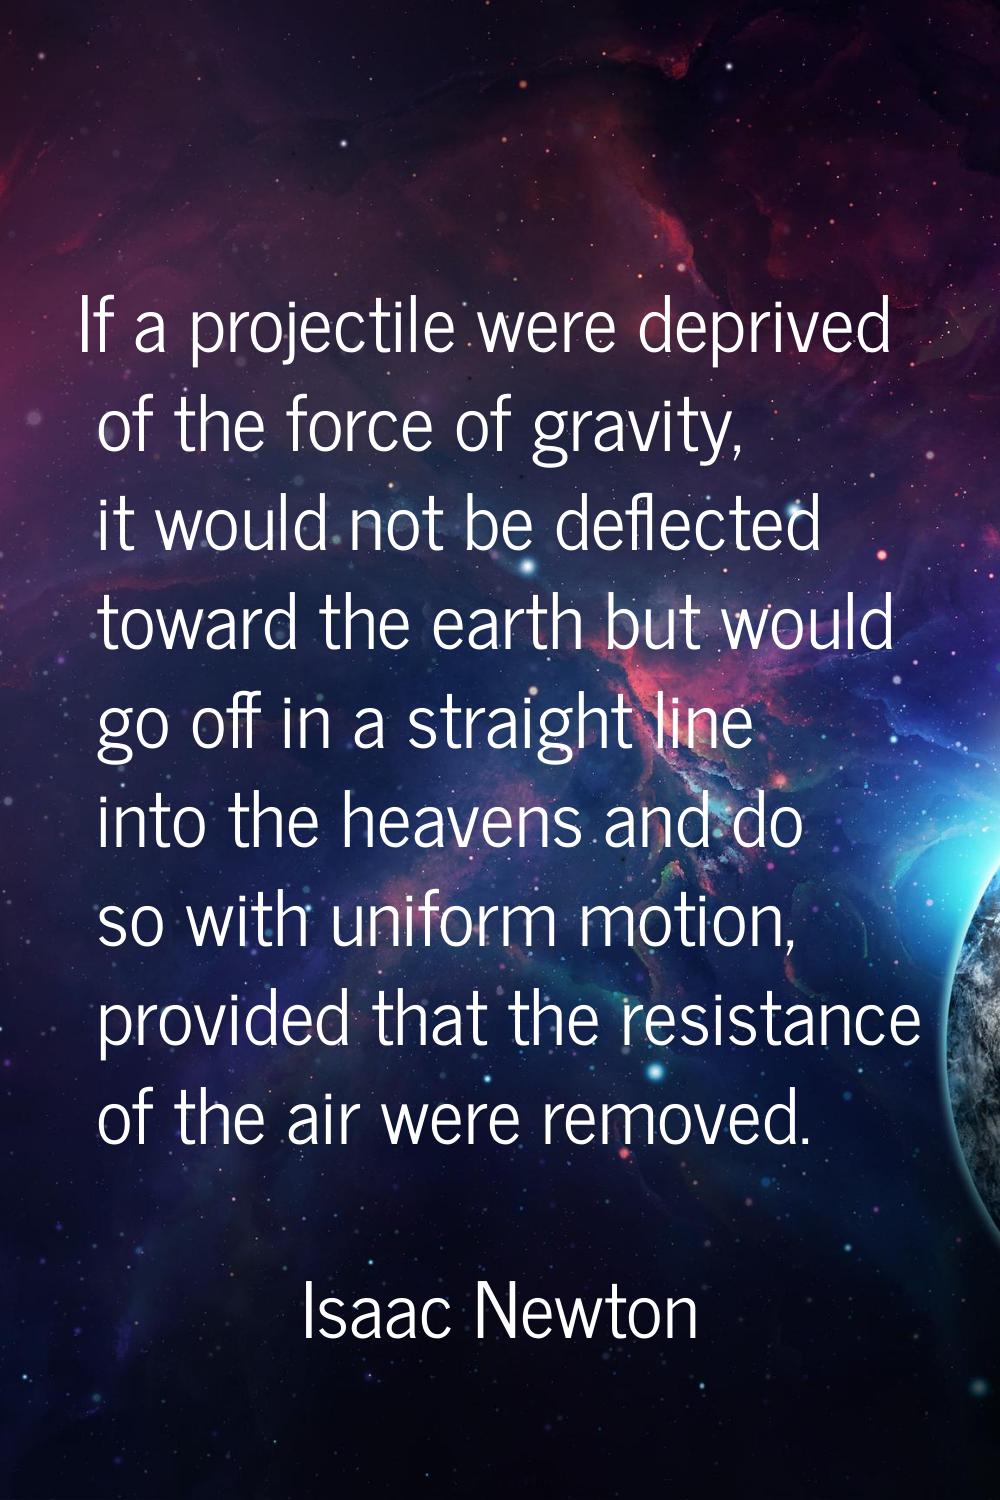 If a projectile were deprived of the force of gravity, it would not be deflected toward the earth b